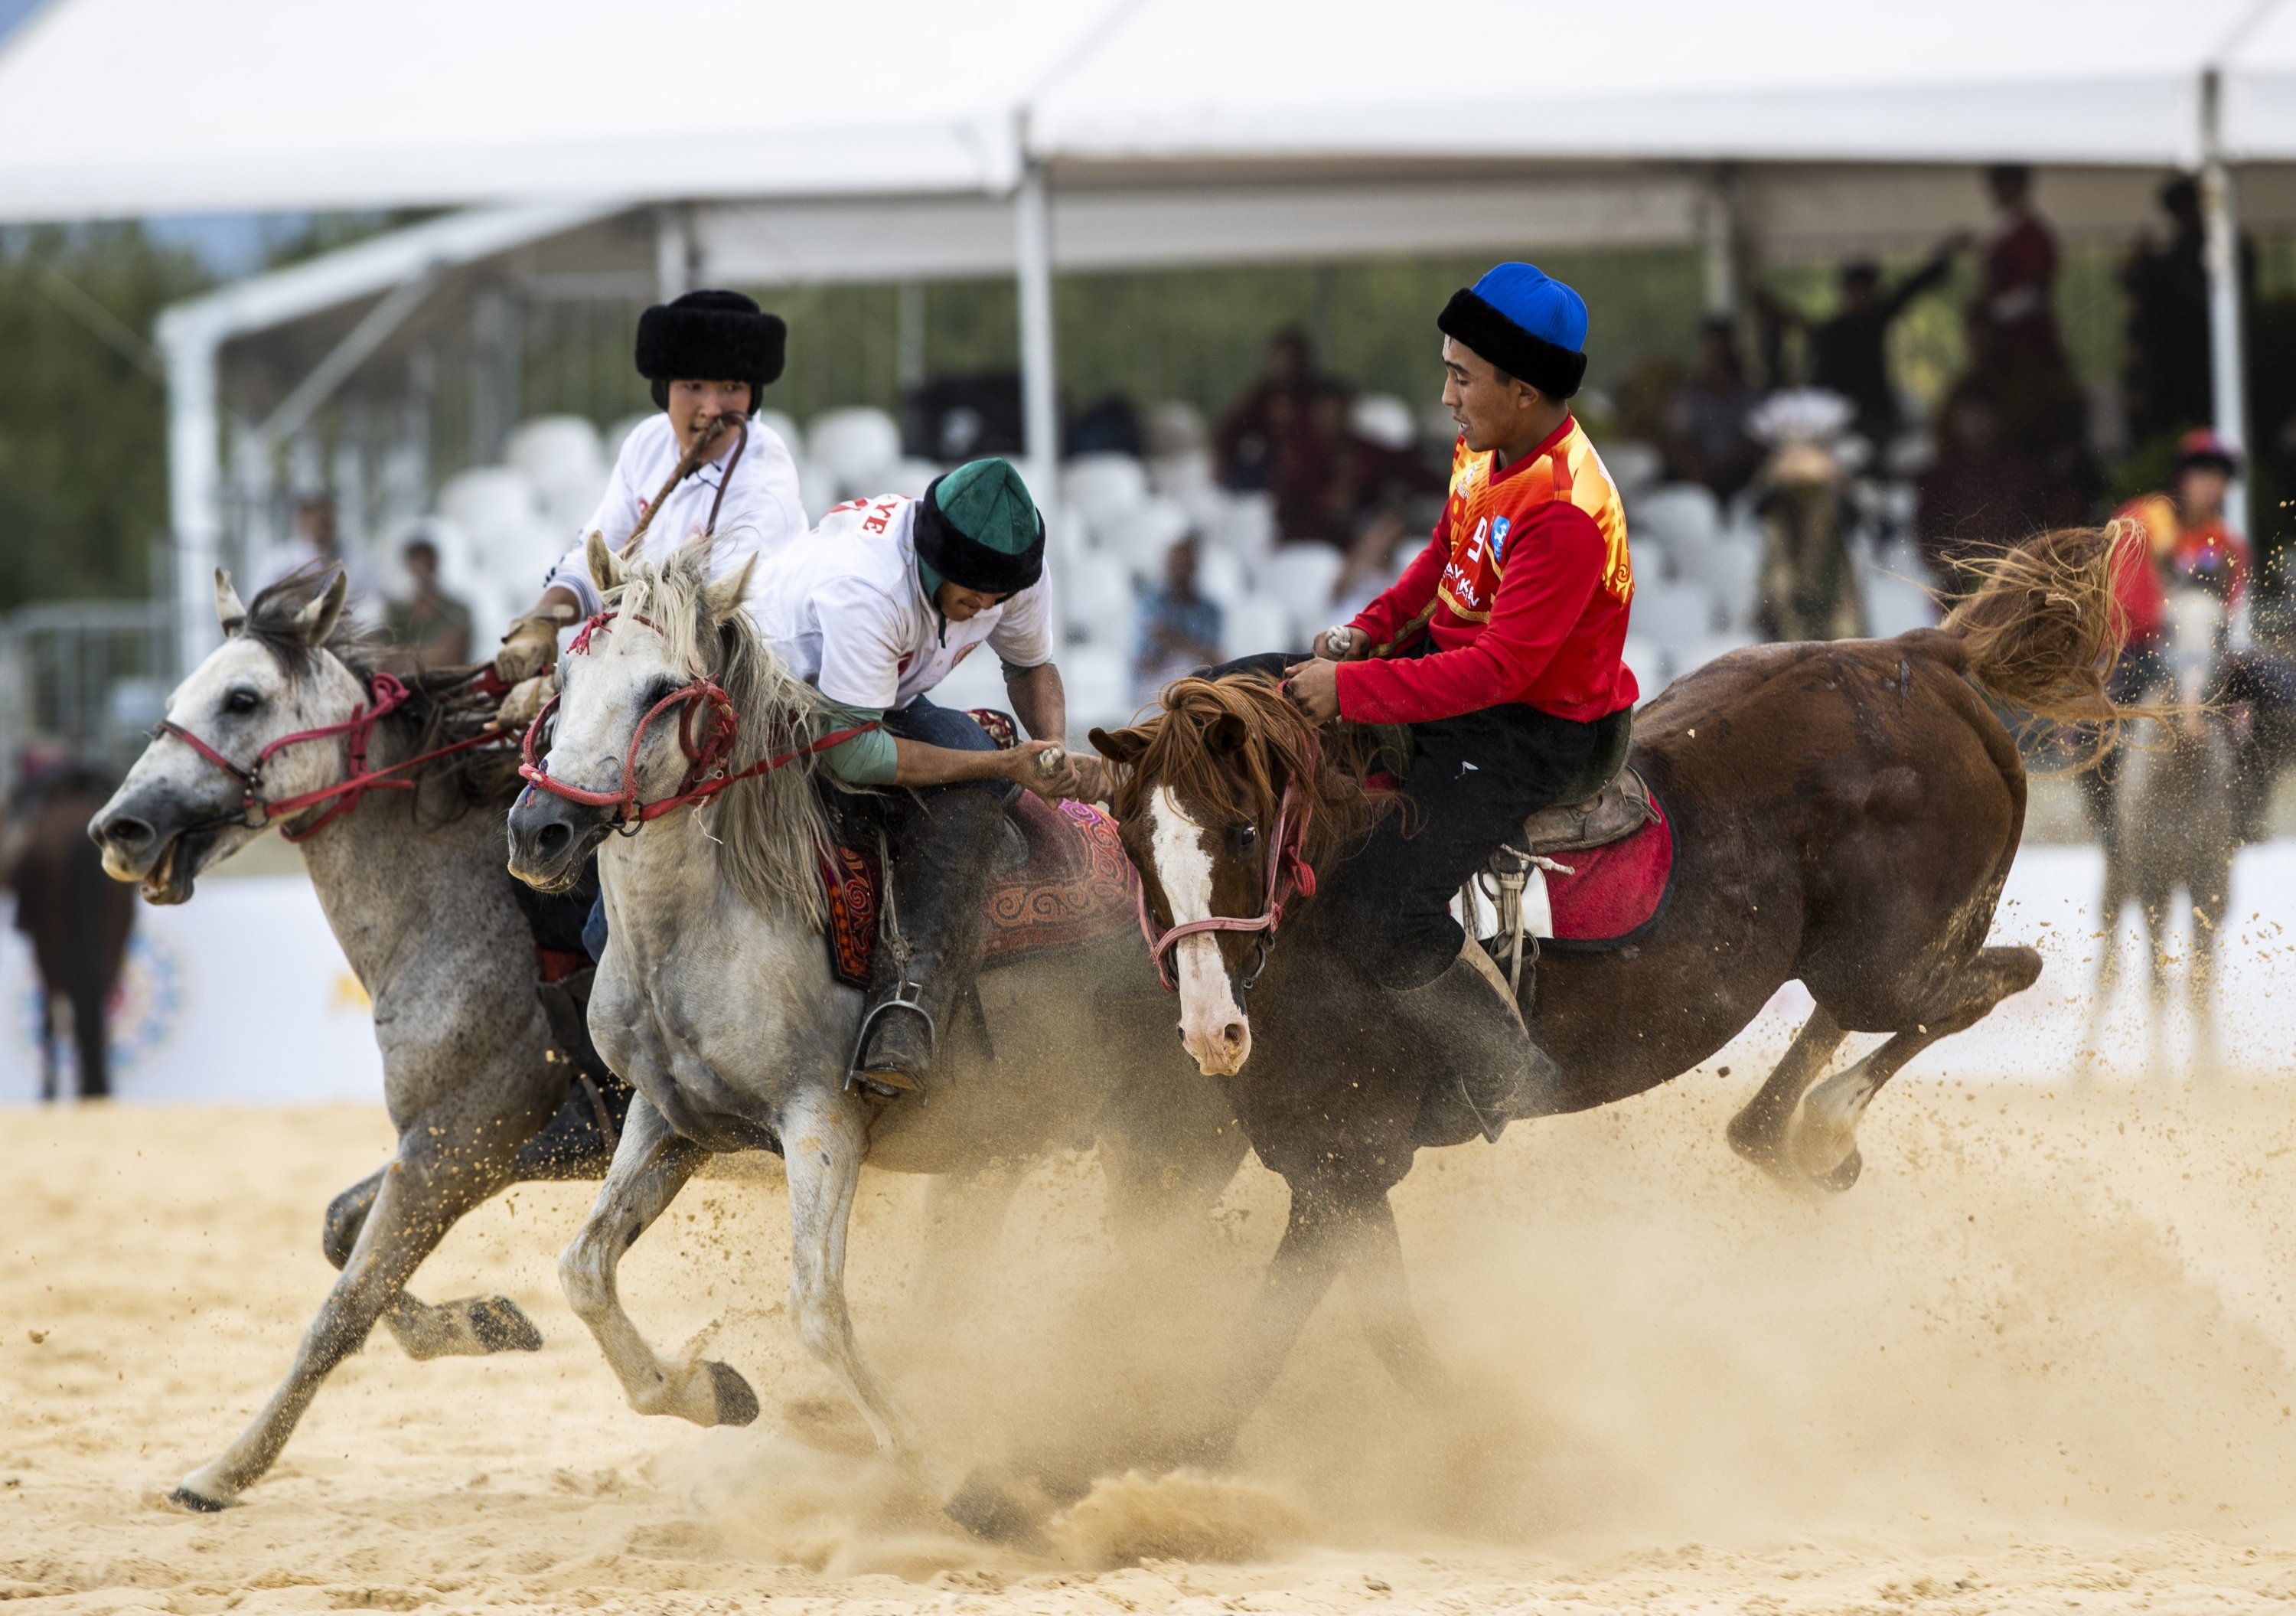 4th World Nomad Games revive Turkic traditions in Iznik | Daily Sabah